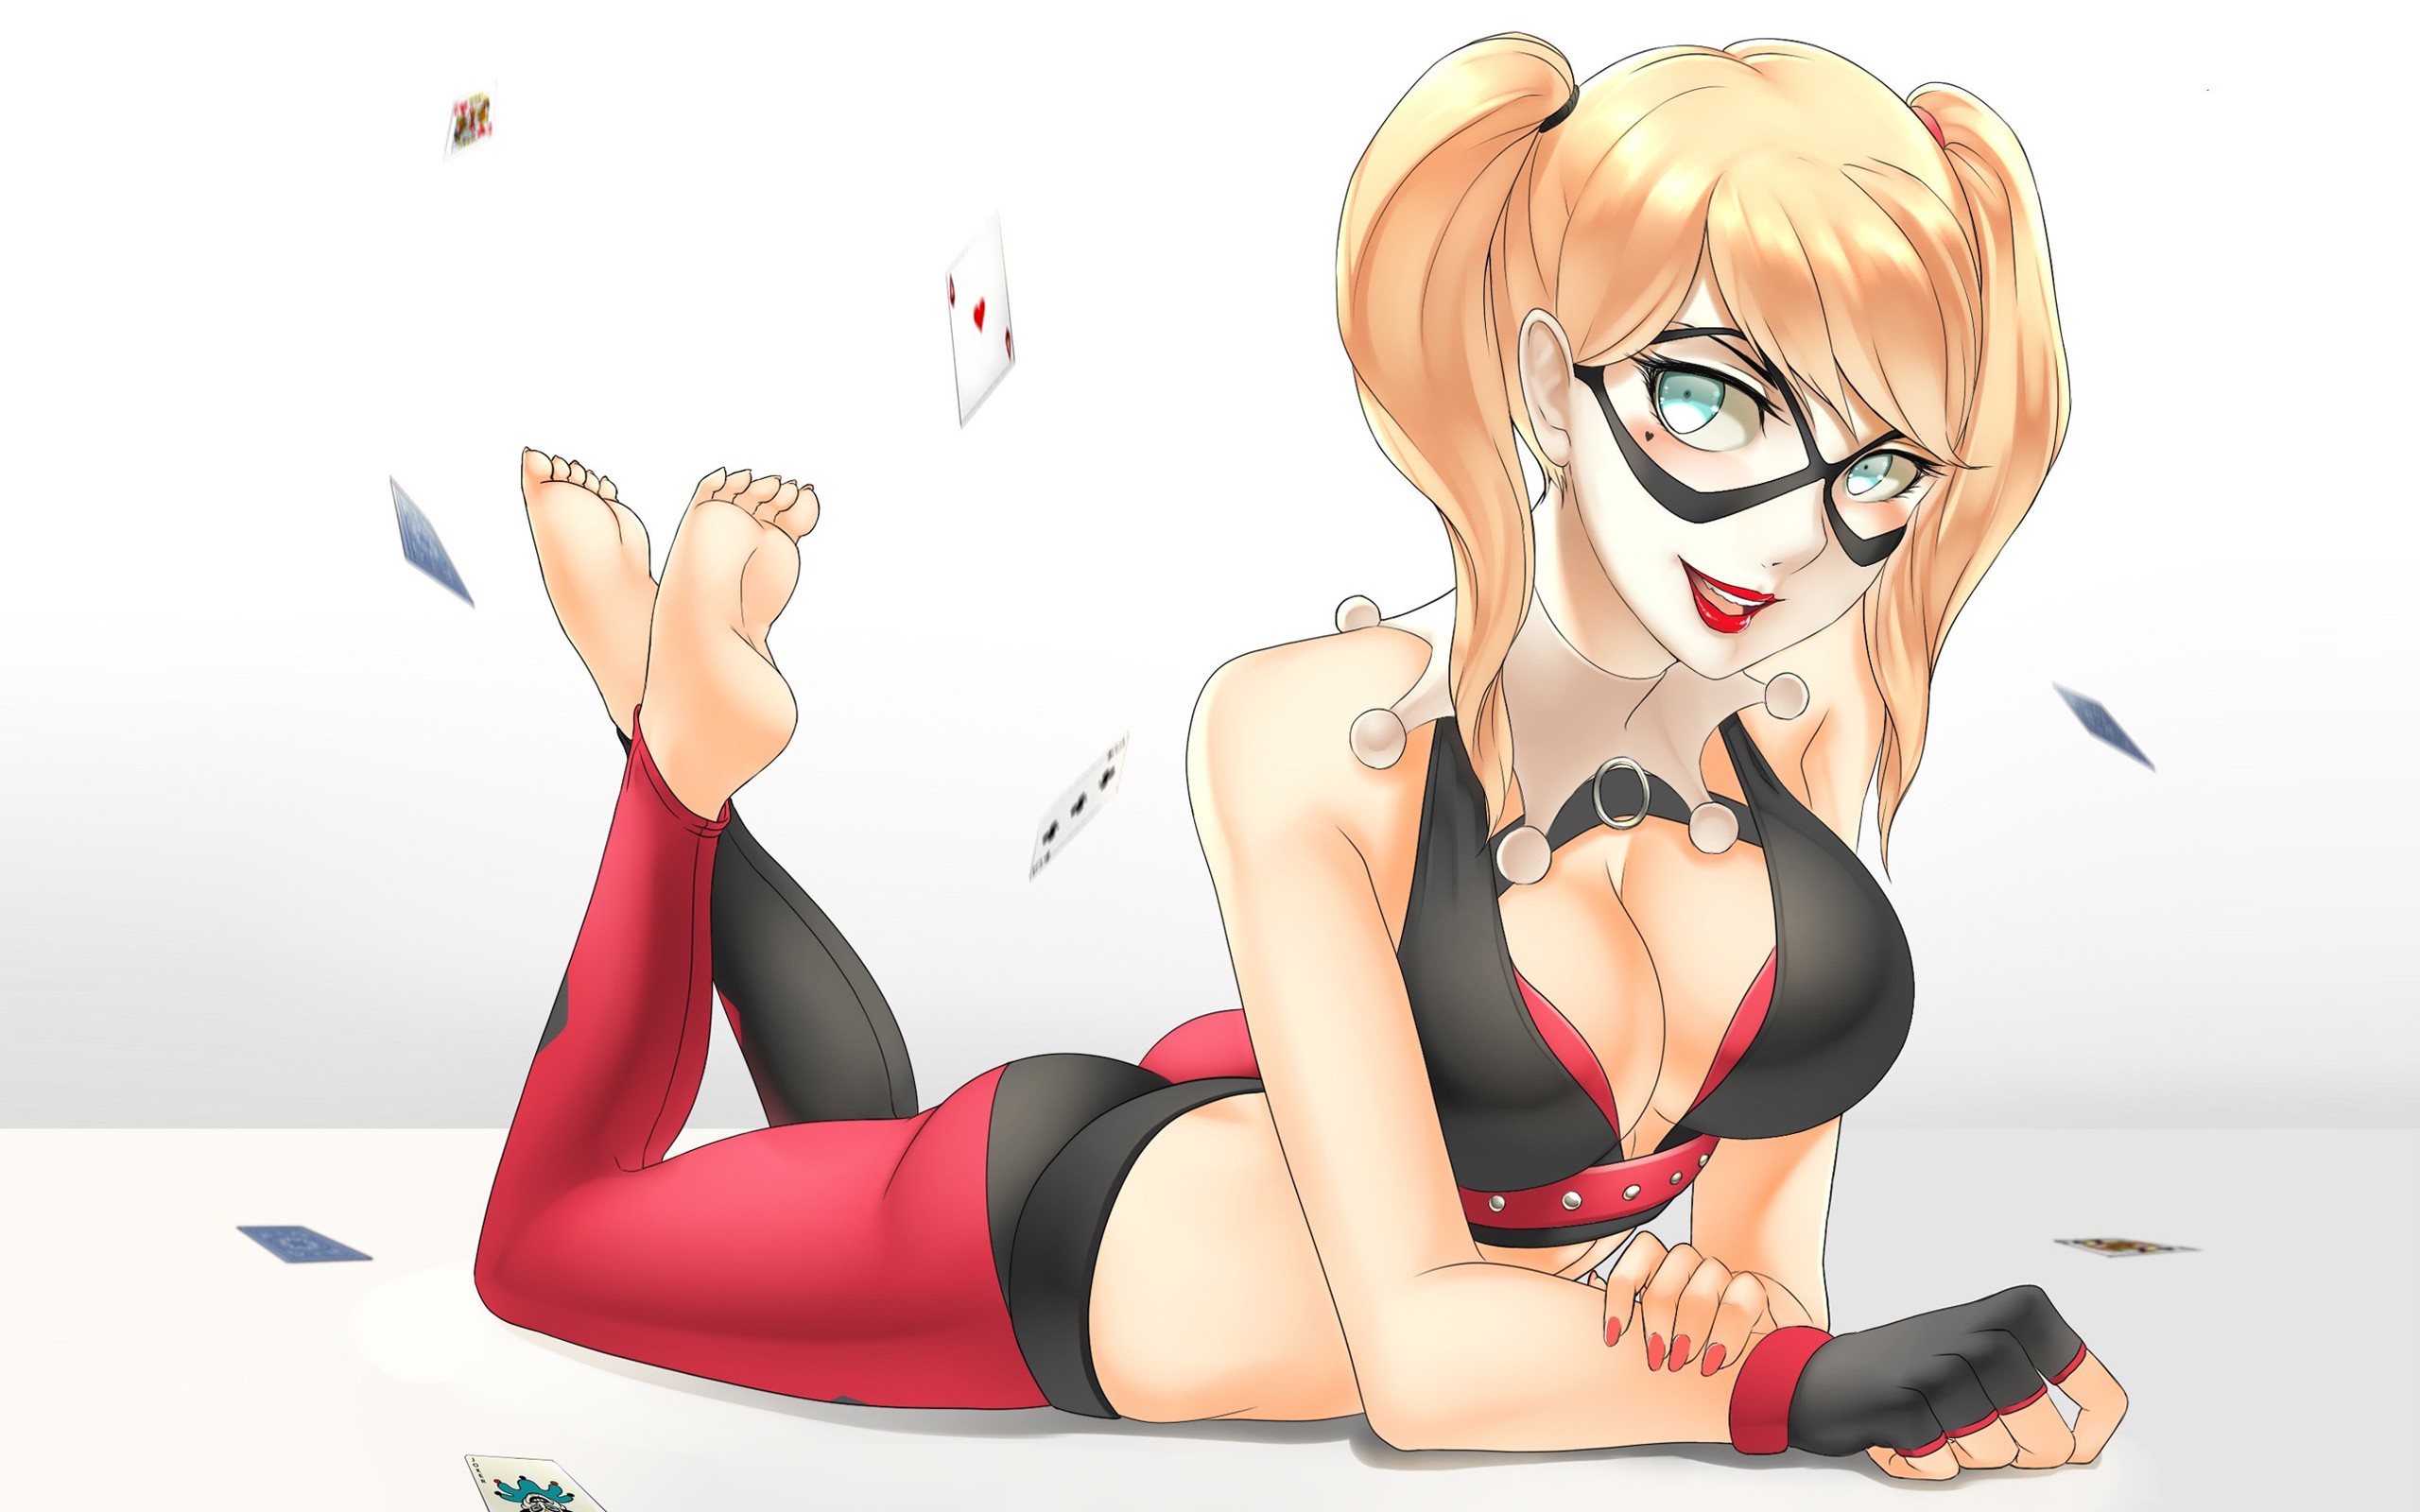 General 2560x1600 Harley Quinn comics DC Comics illustration simple background lying on front villains Batman fan art barefoot red lipstick boobs white background playing cards blonde red nails fingerless gloves painted nails legs up aqua eyes looking at viewer women ass